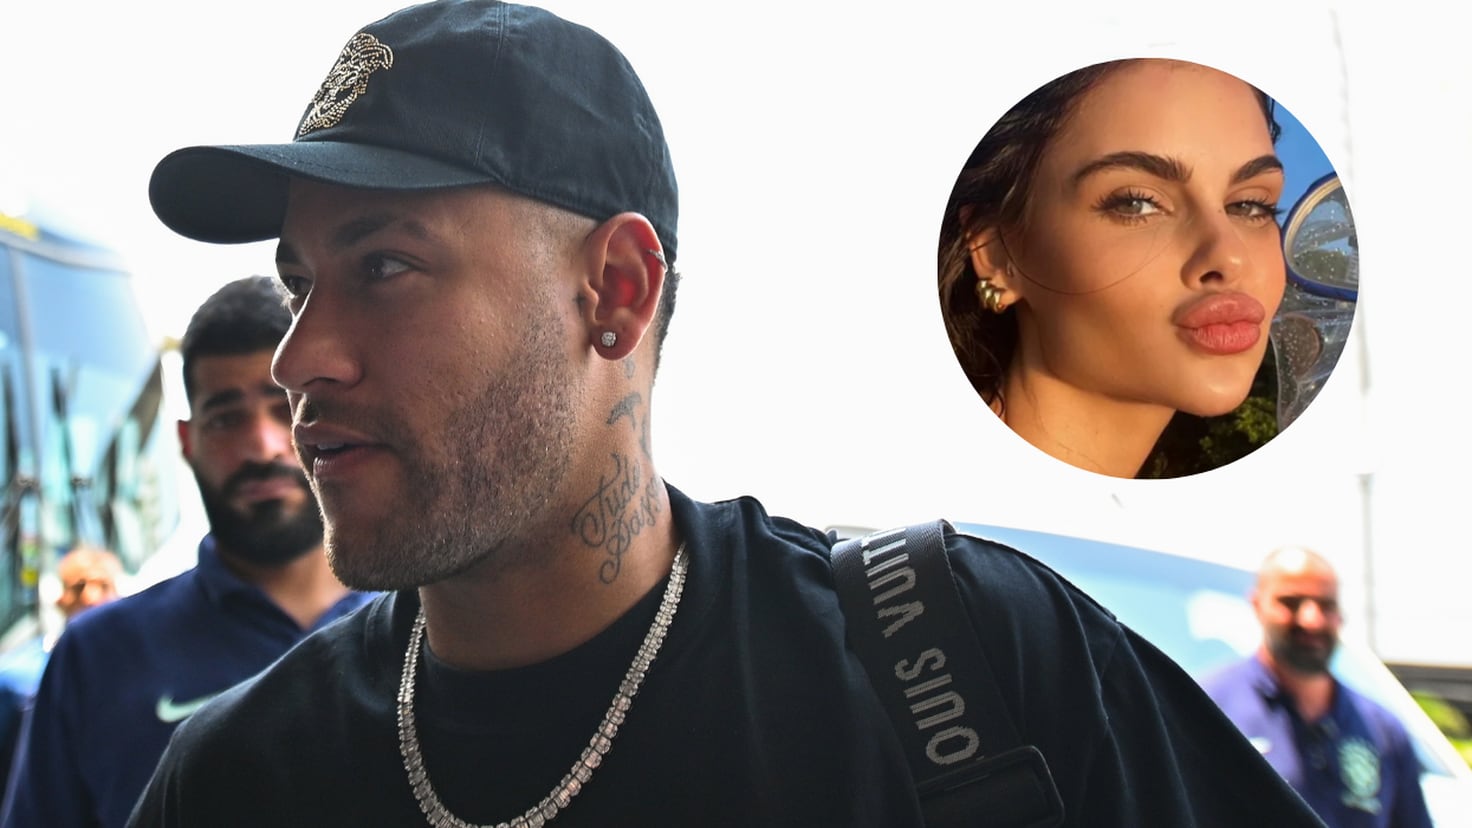 Neymar asks for a DNA test from a Brazilian model who claims to be pregnant with him
